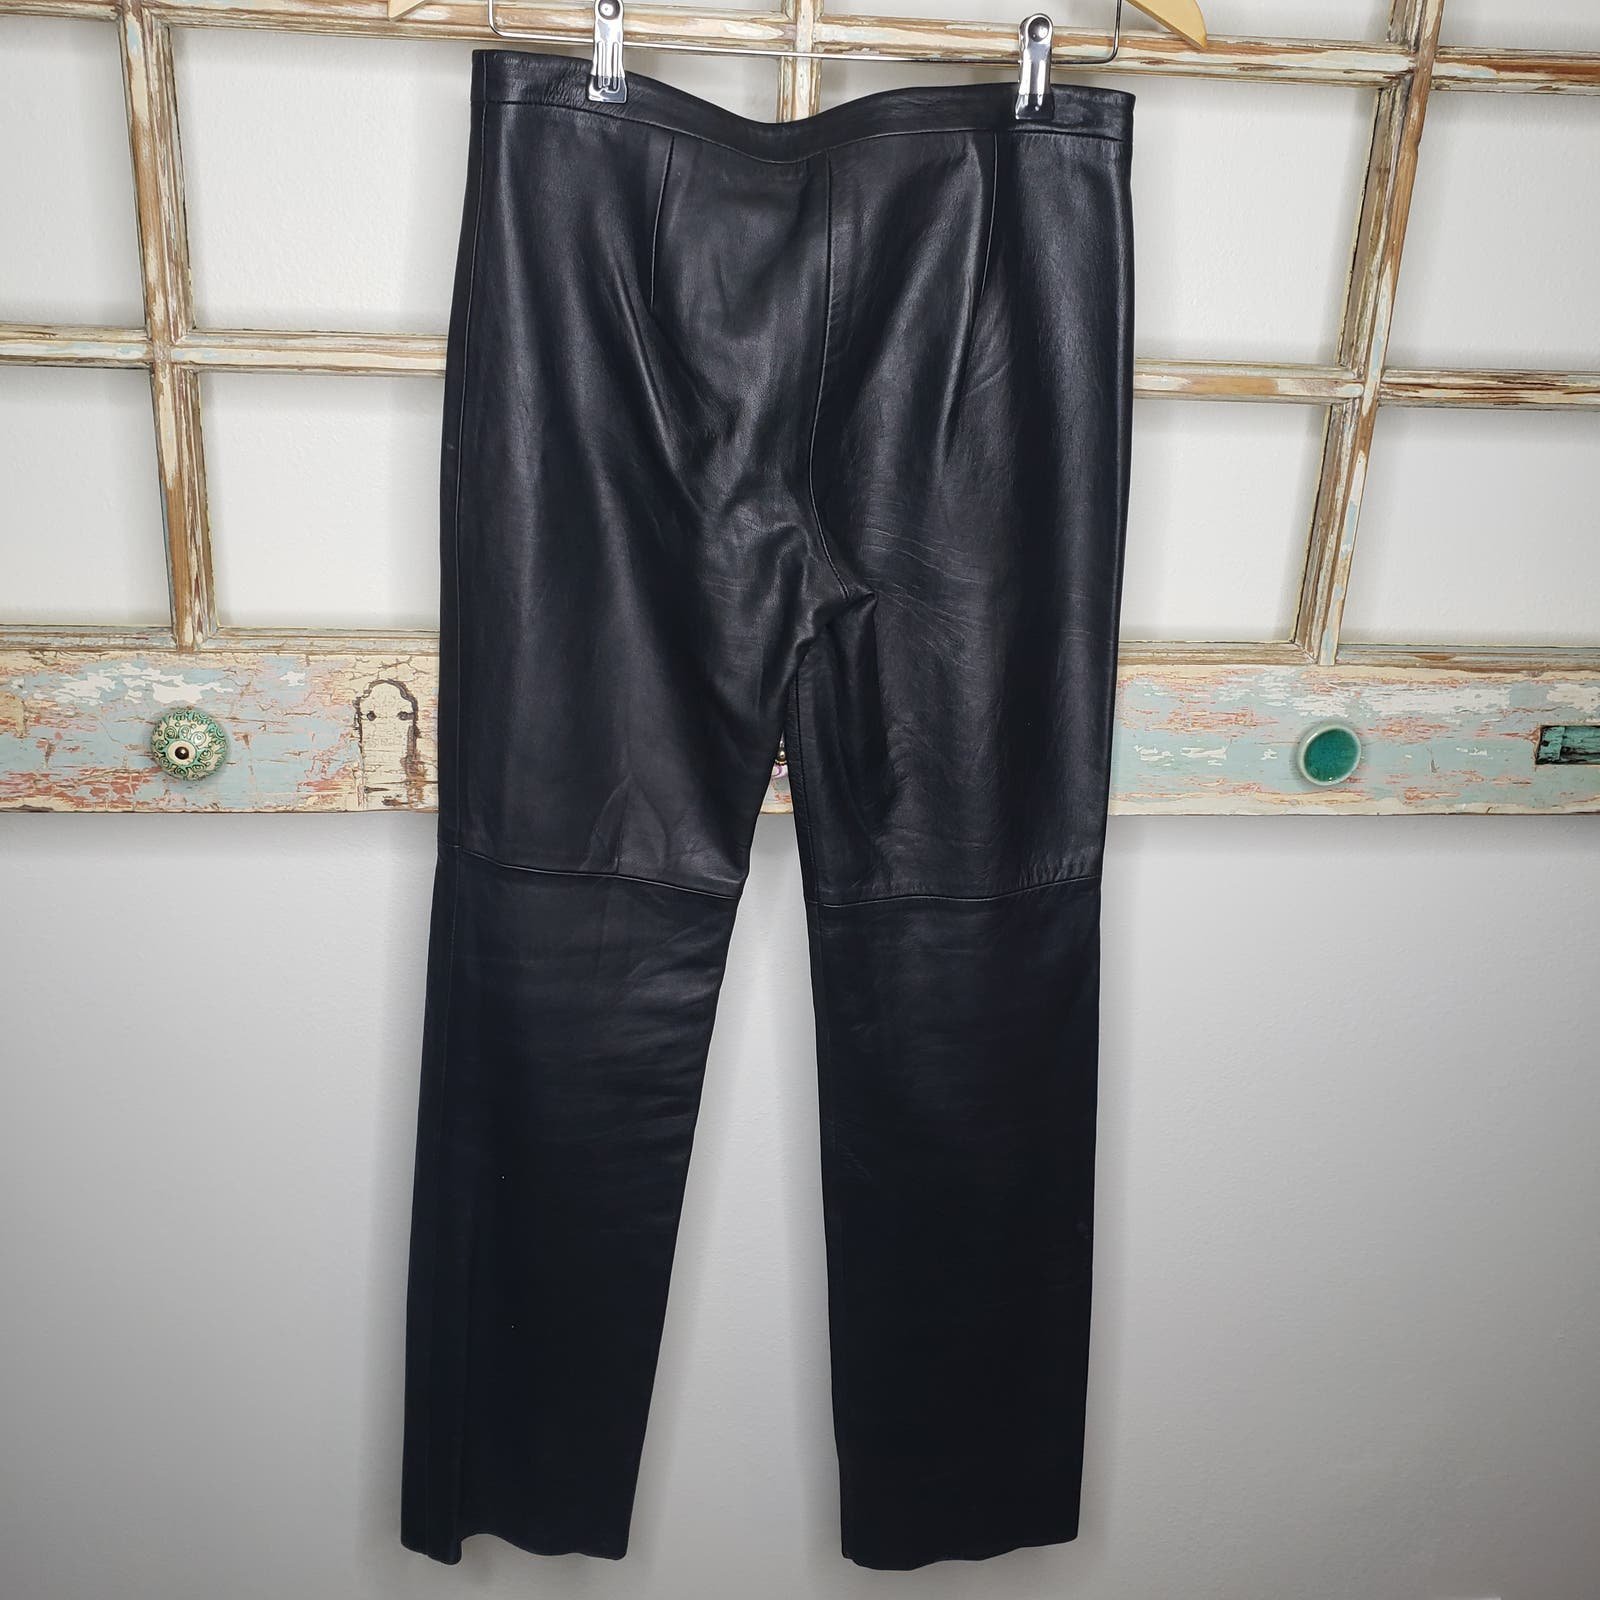 large discount BCBG MAXAZRIA 100% LEATHER PANTS LADIES SIZE 4 kJCF4n5aN for sale